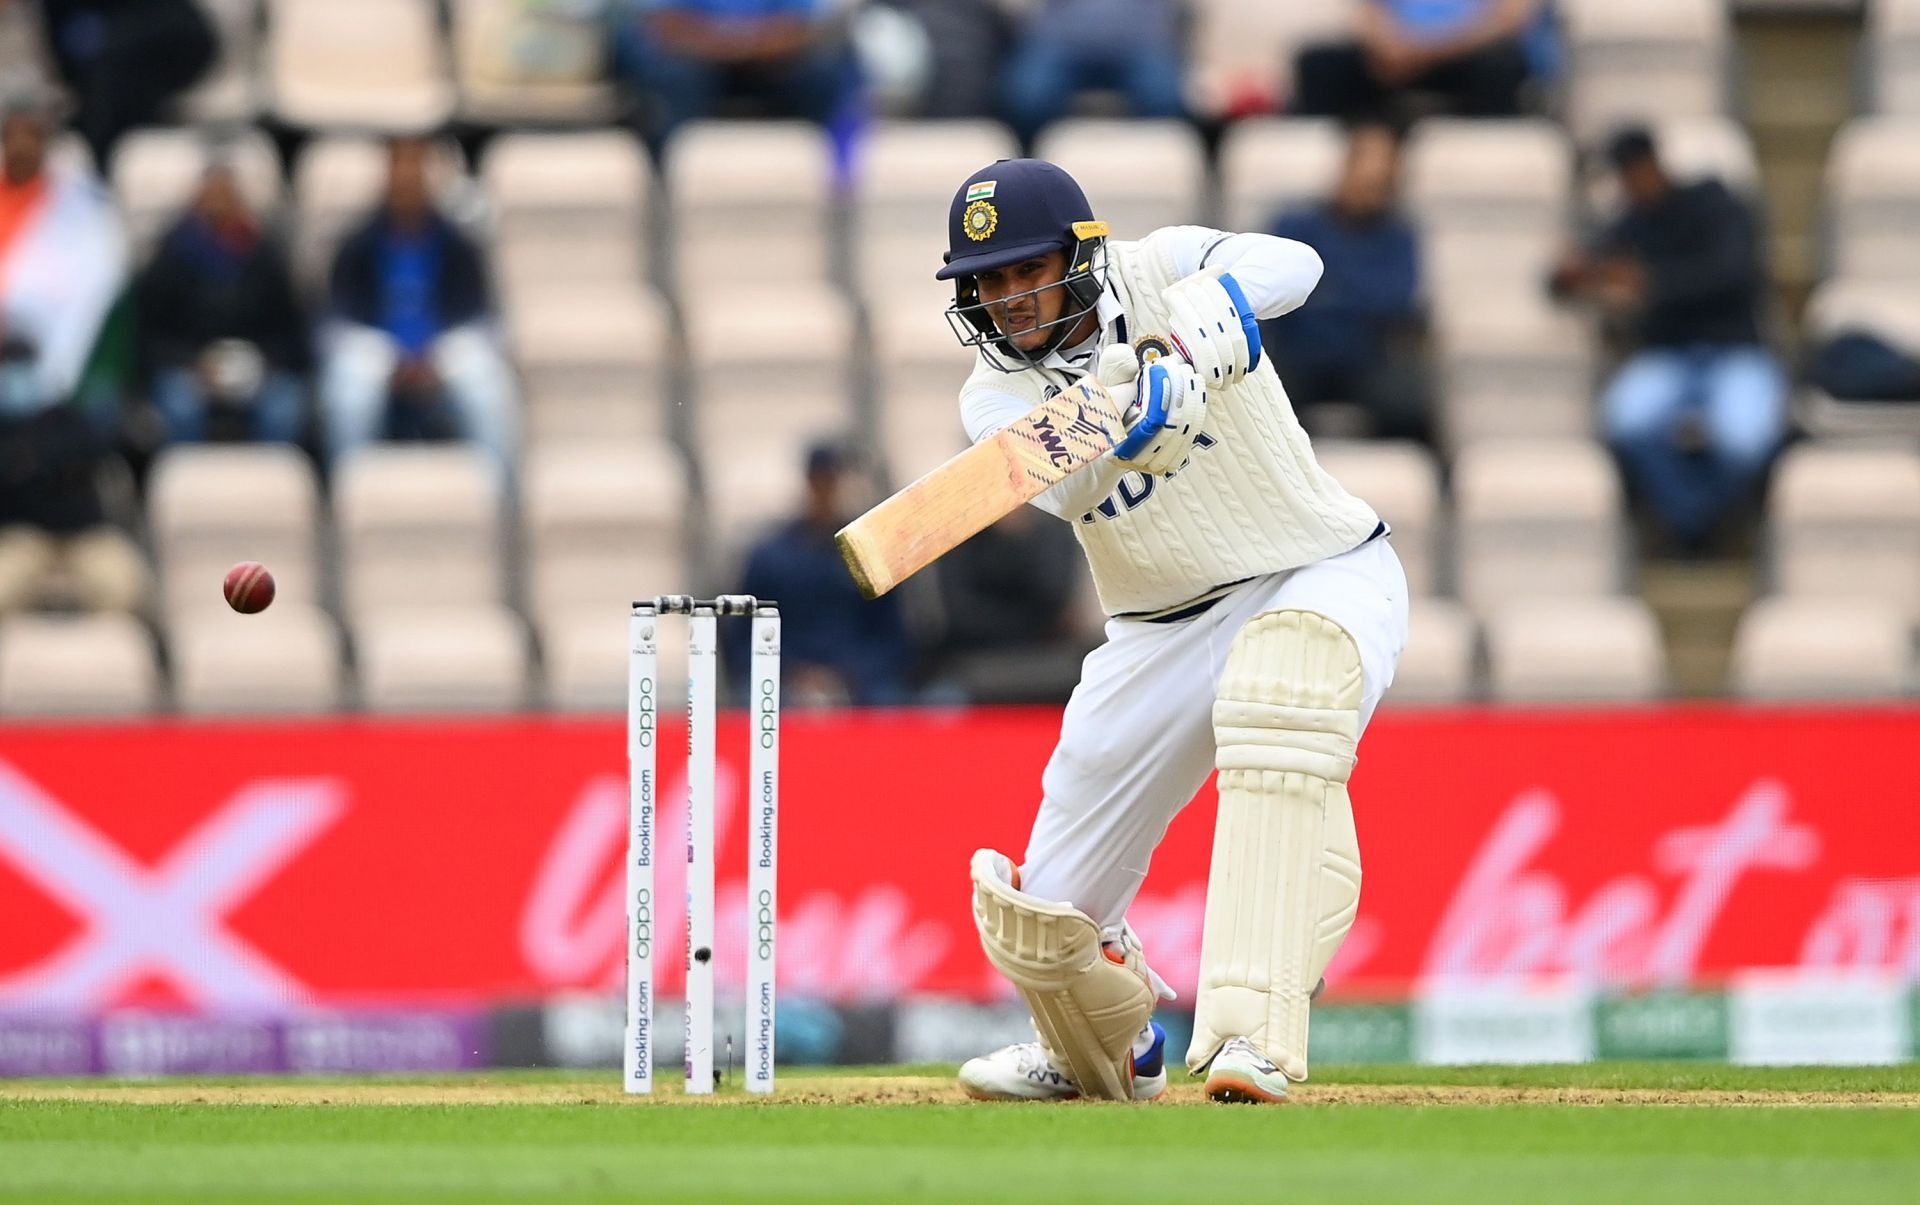 Shubman Gill missed the England Test series last year due to an injury